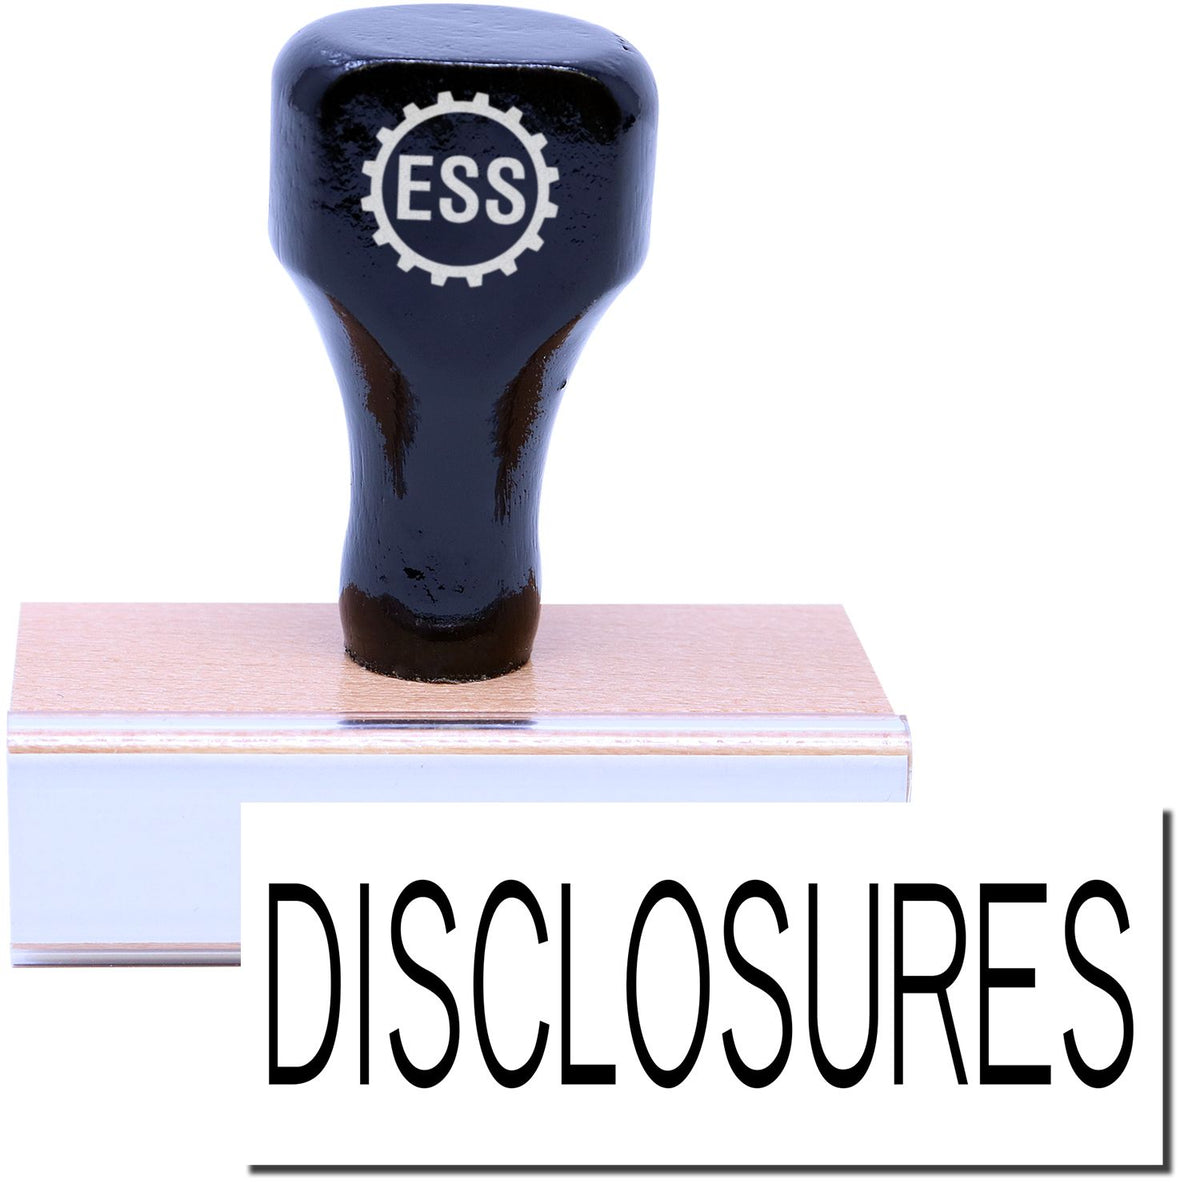 A stock office rubber stamp with a stamped image showing how the text &quot;DISCLOSURES&quot; in a large font is displayed after stamping.